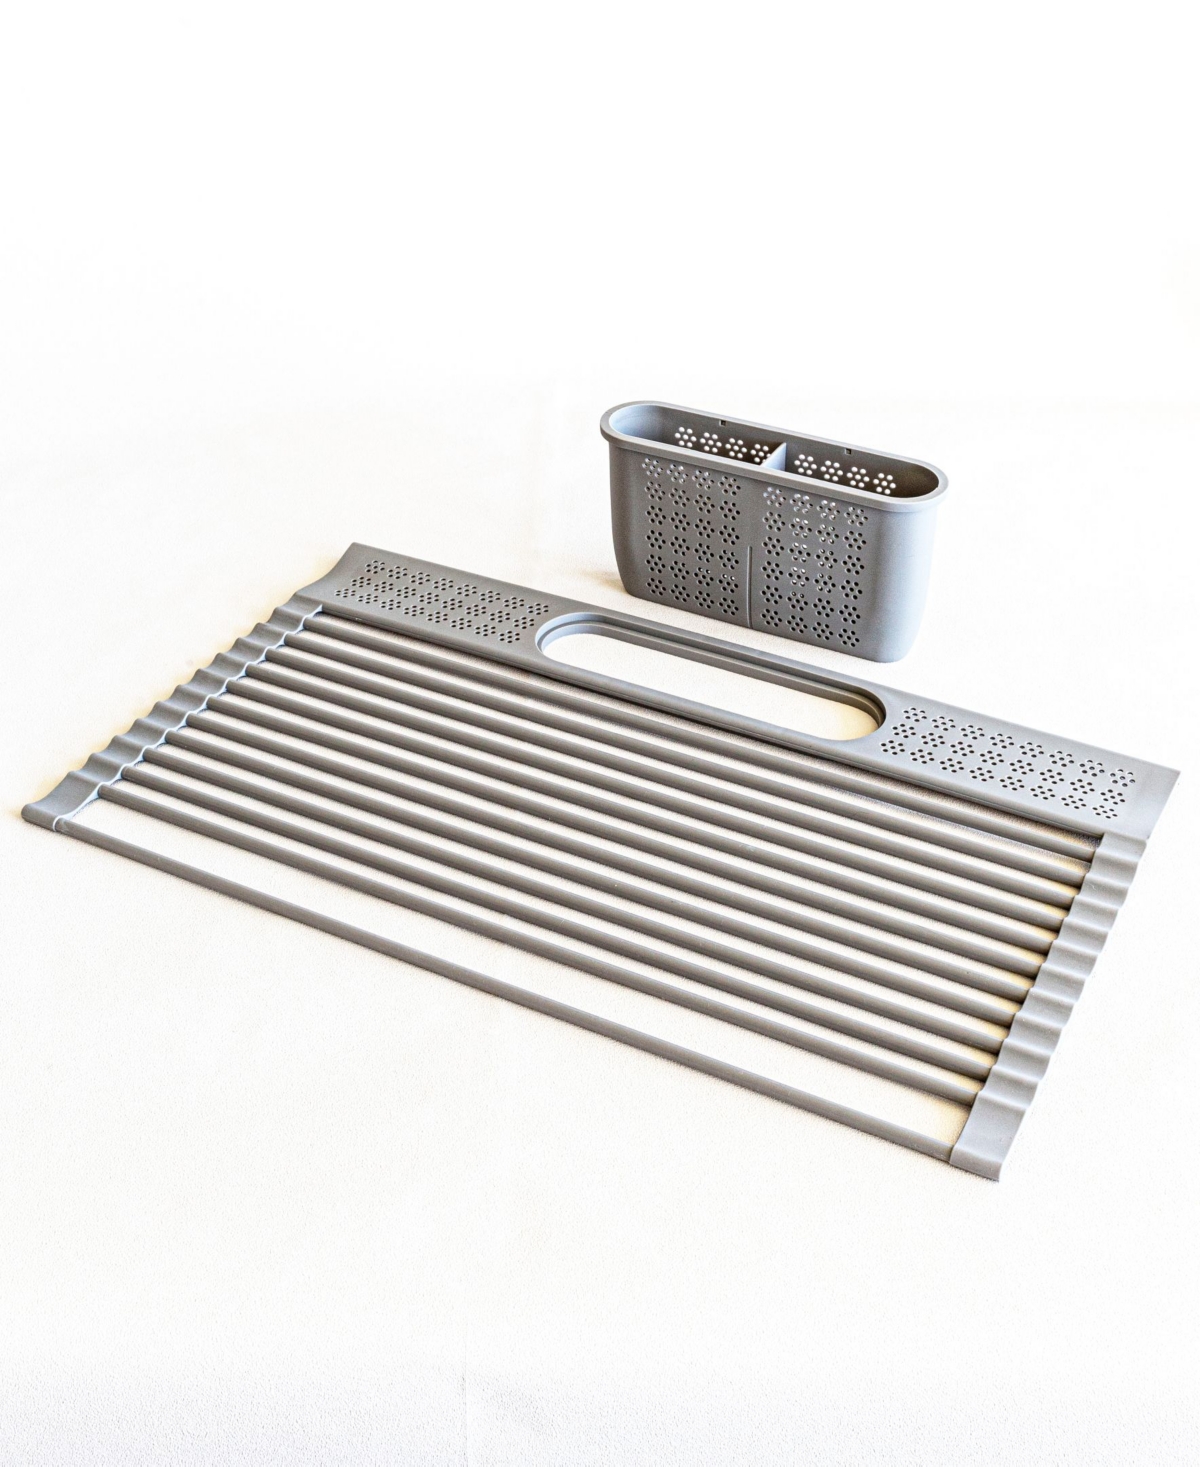 Over the Sink Drying Dish Rack with Caddy - Gray